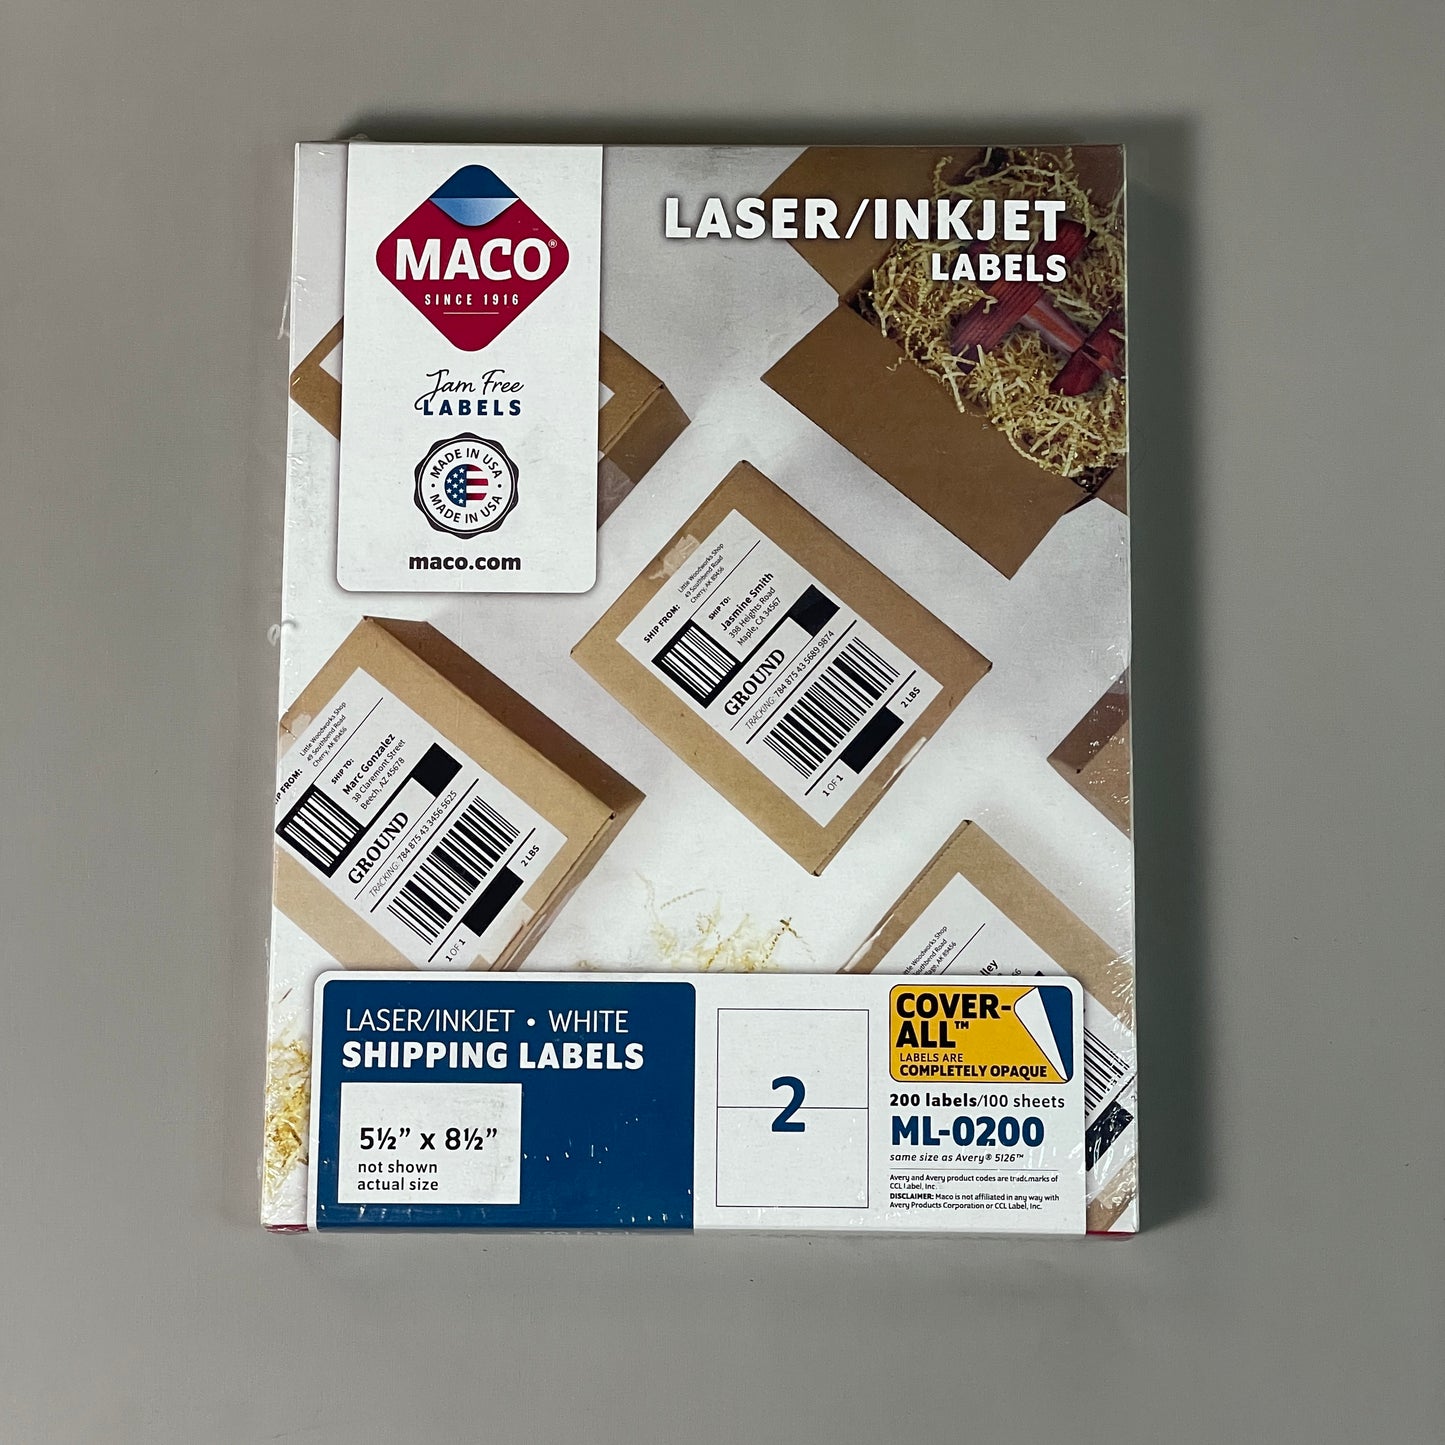 MACO Laser / Ink Jet White Shipping Labels 5.5" x 8.5” 200 Labels (100 sheets) ML-0200